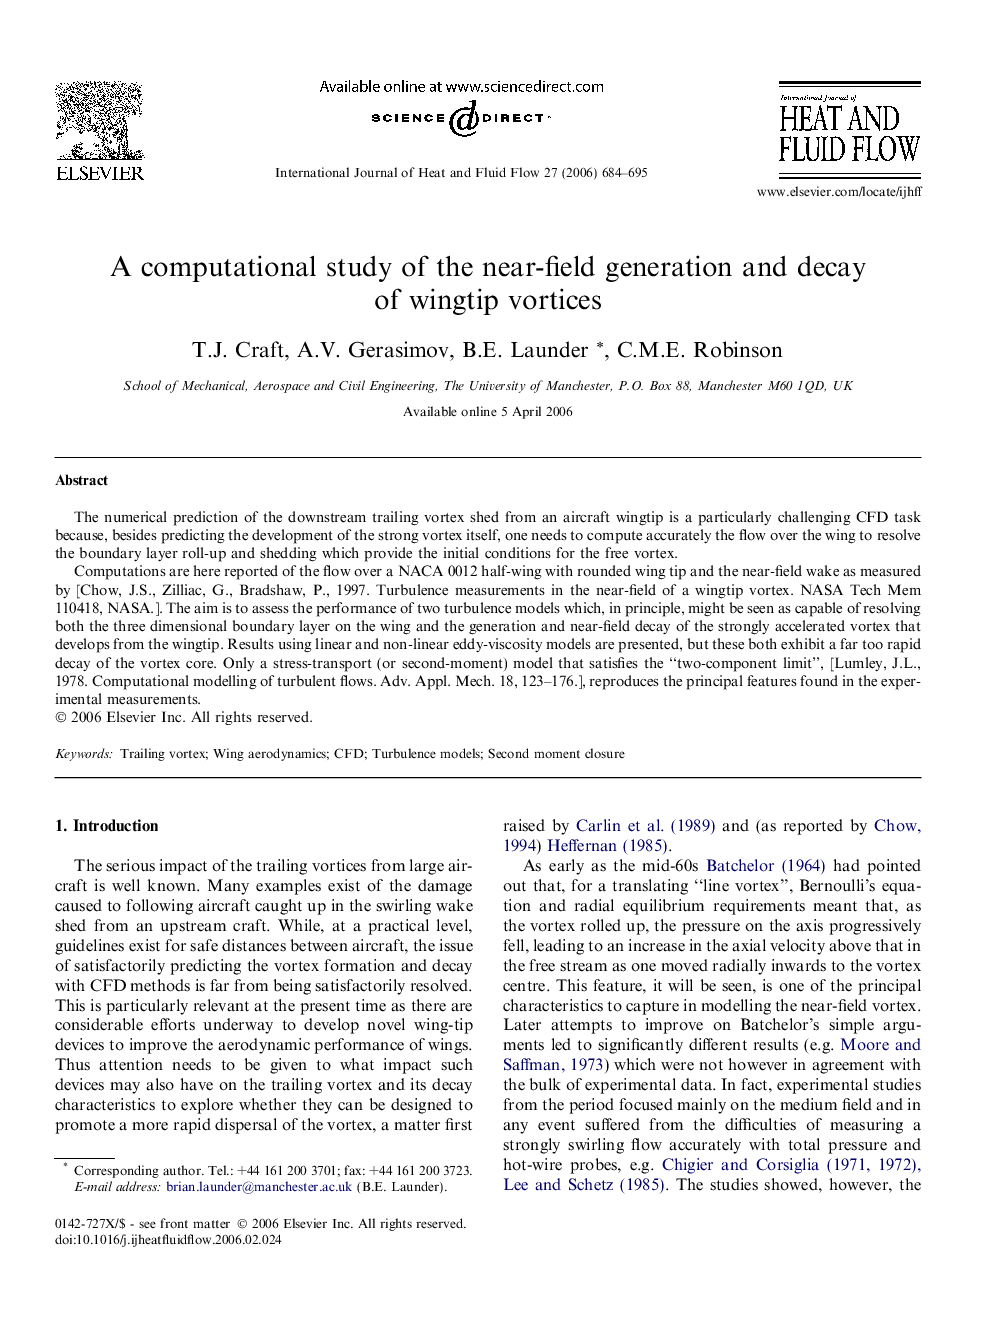 A computational study of the near-field generation and decay of wingtip vortices